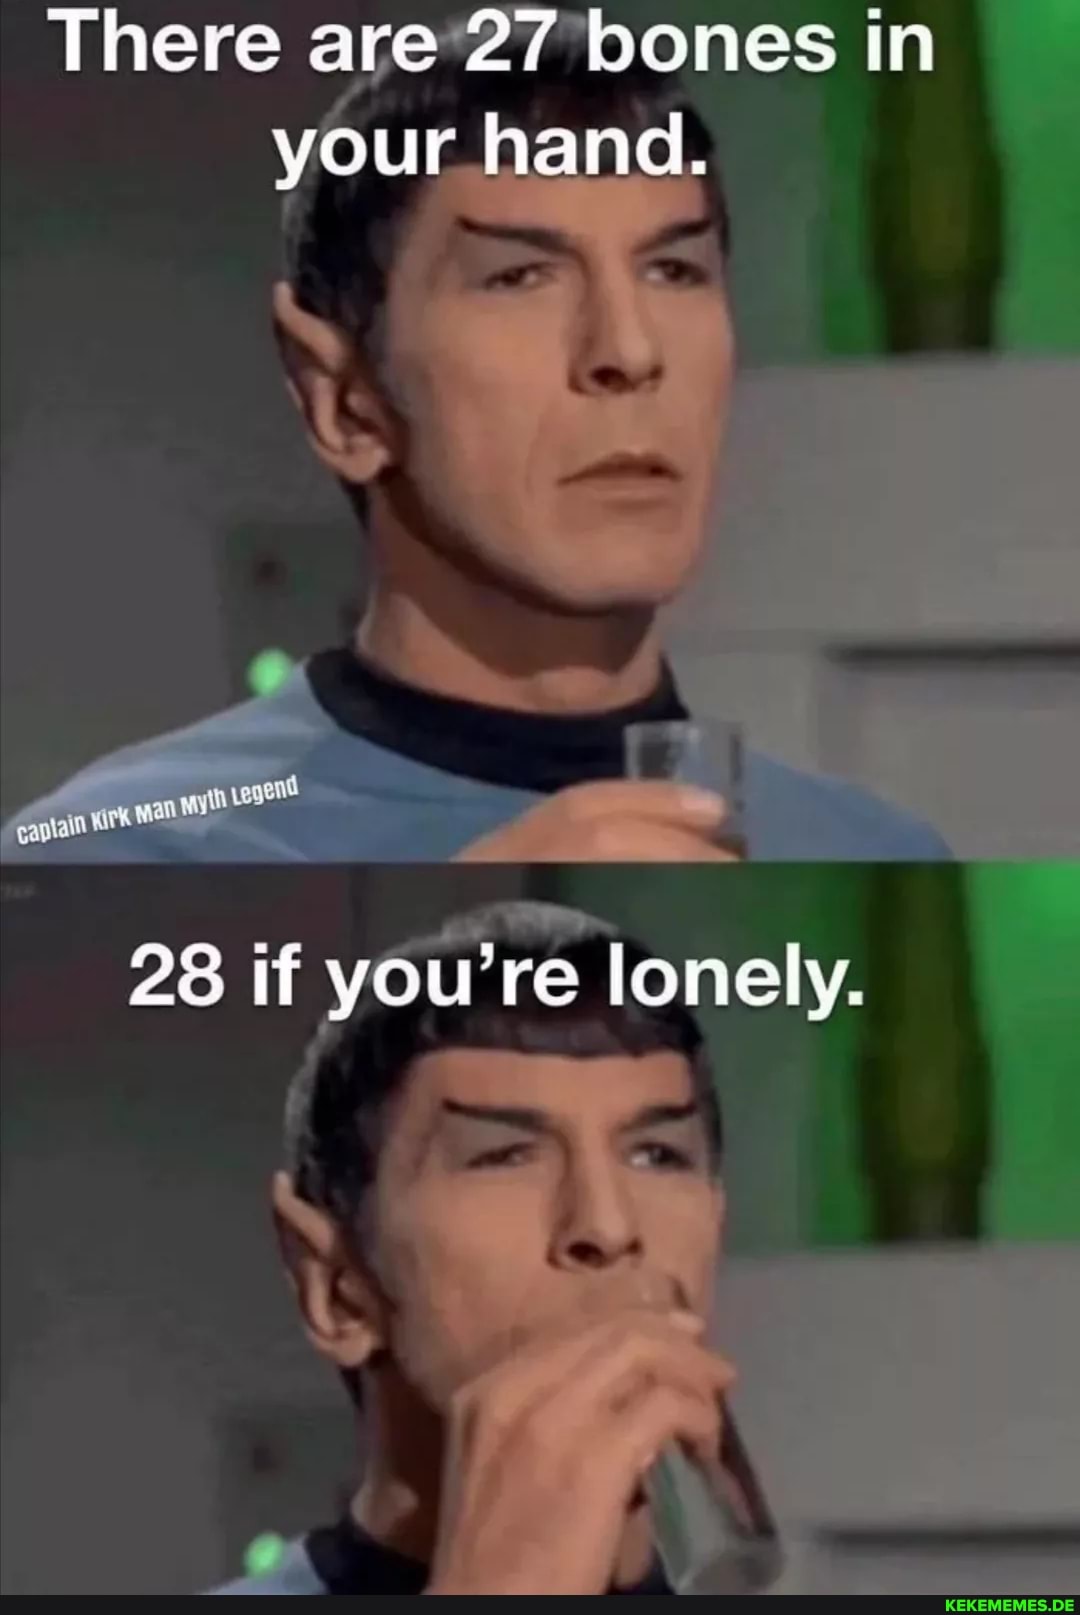 There are 27 bones in your hand. end 28 if you're lonely.